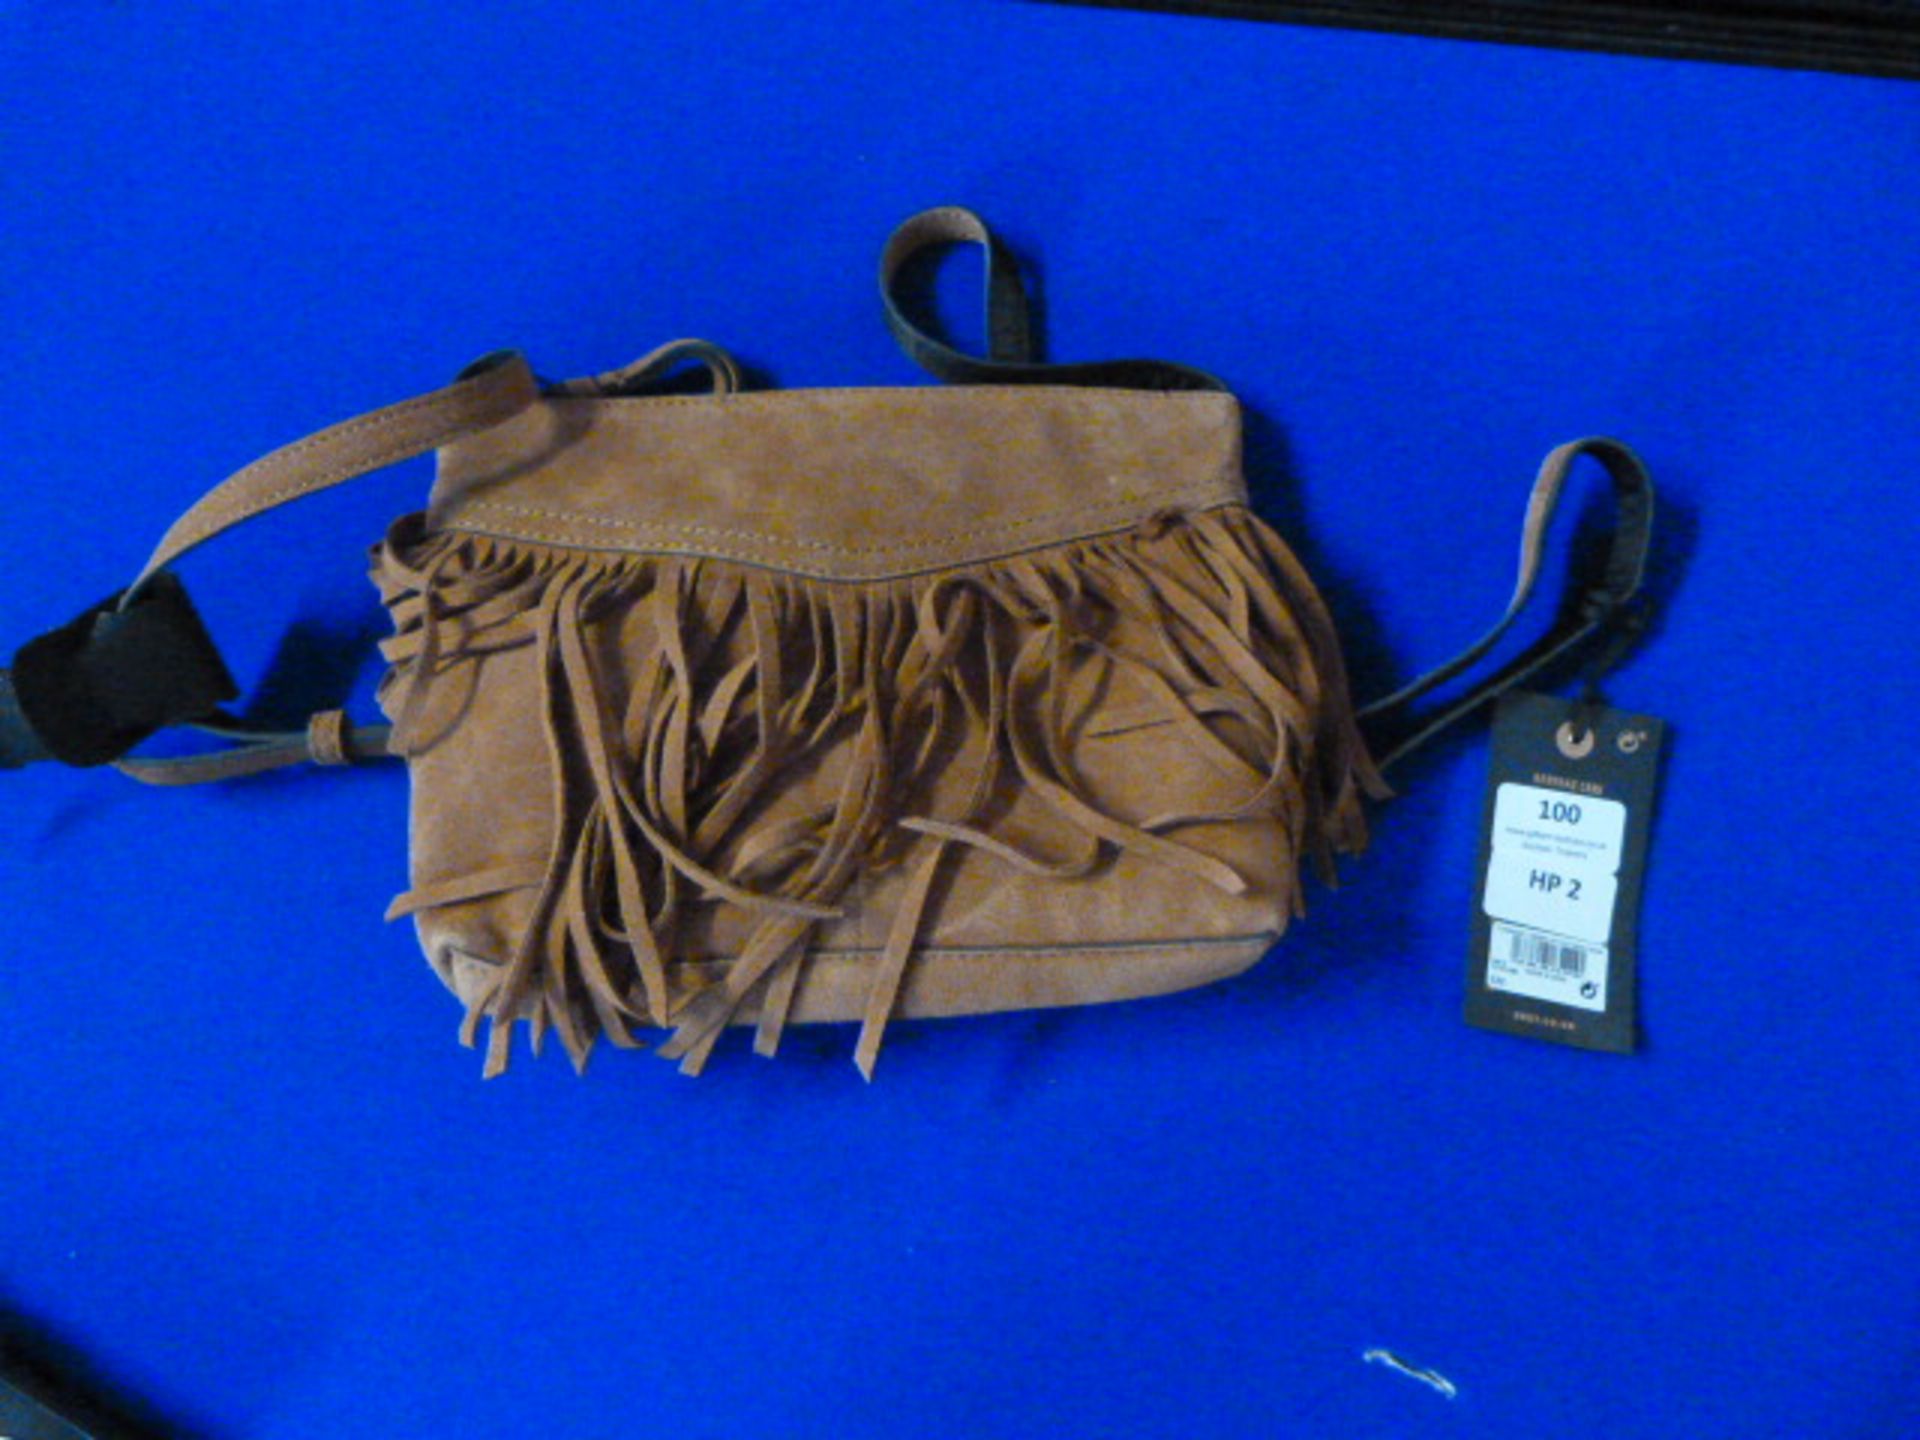 Next Handcrafted Leather Satchel Bag (brown)